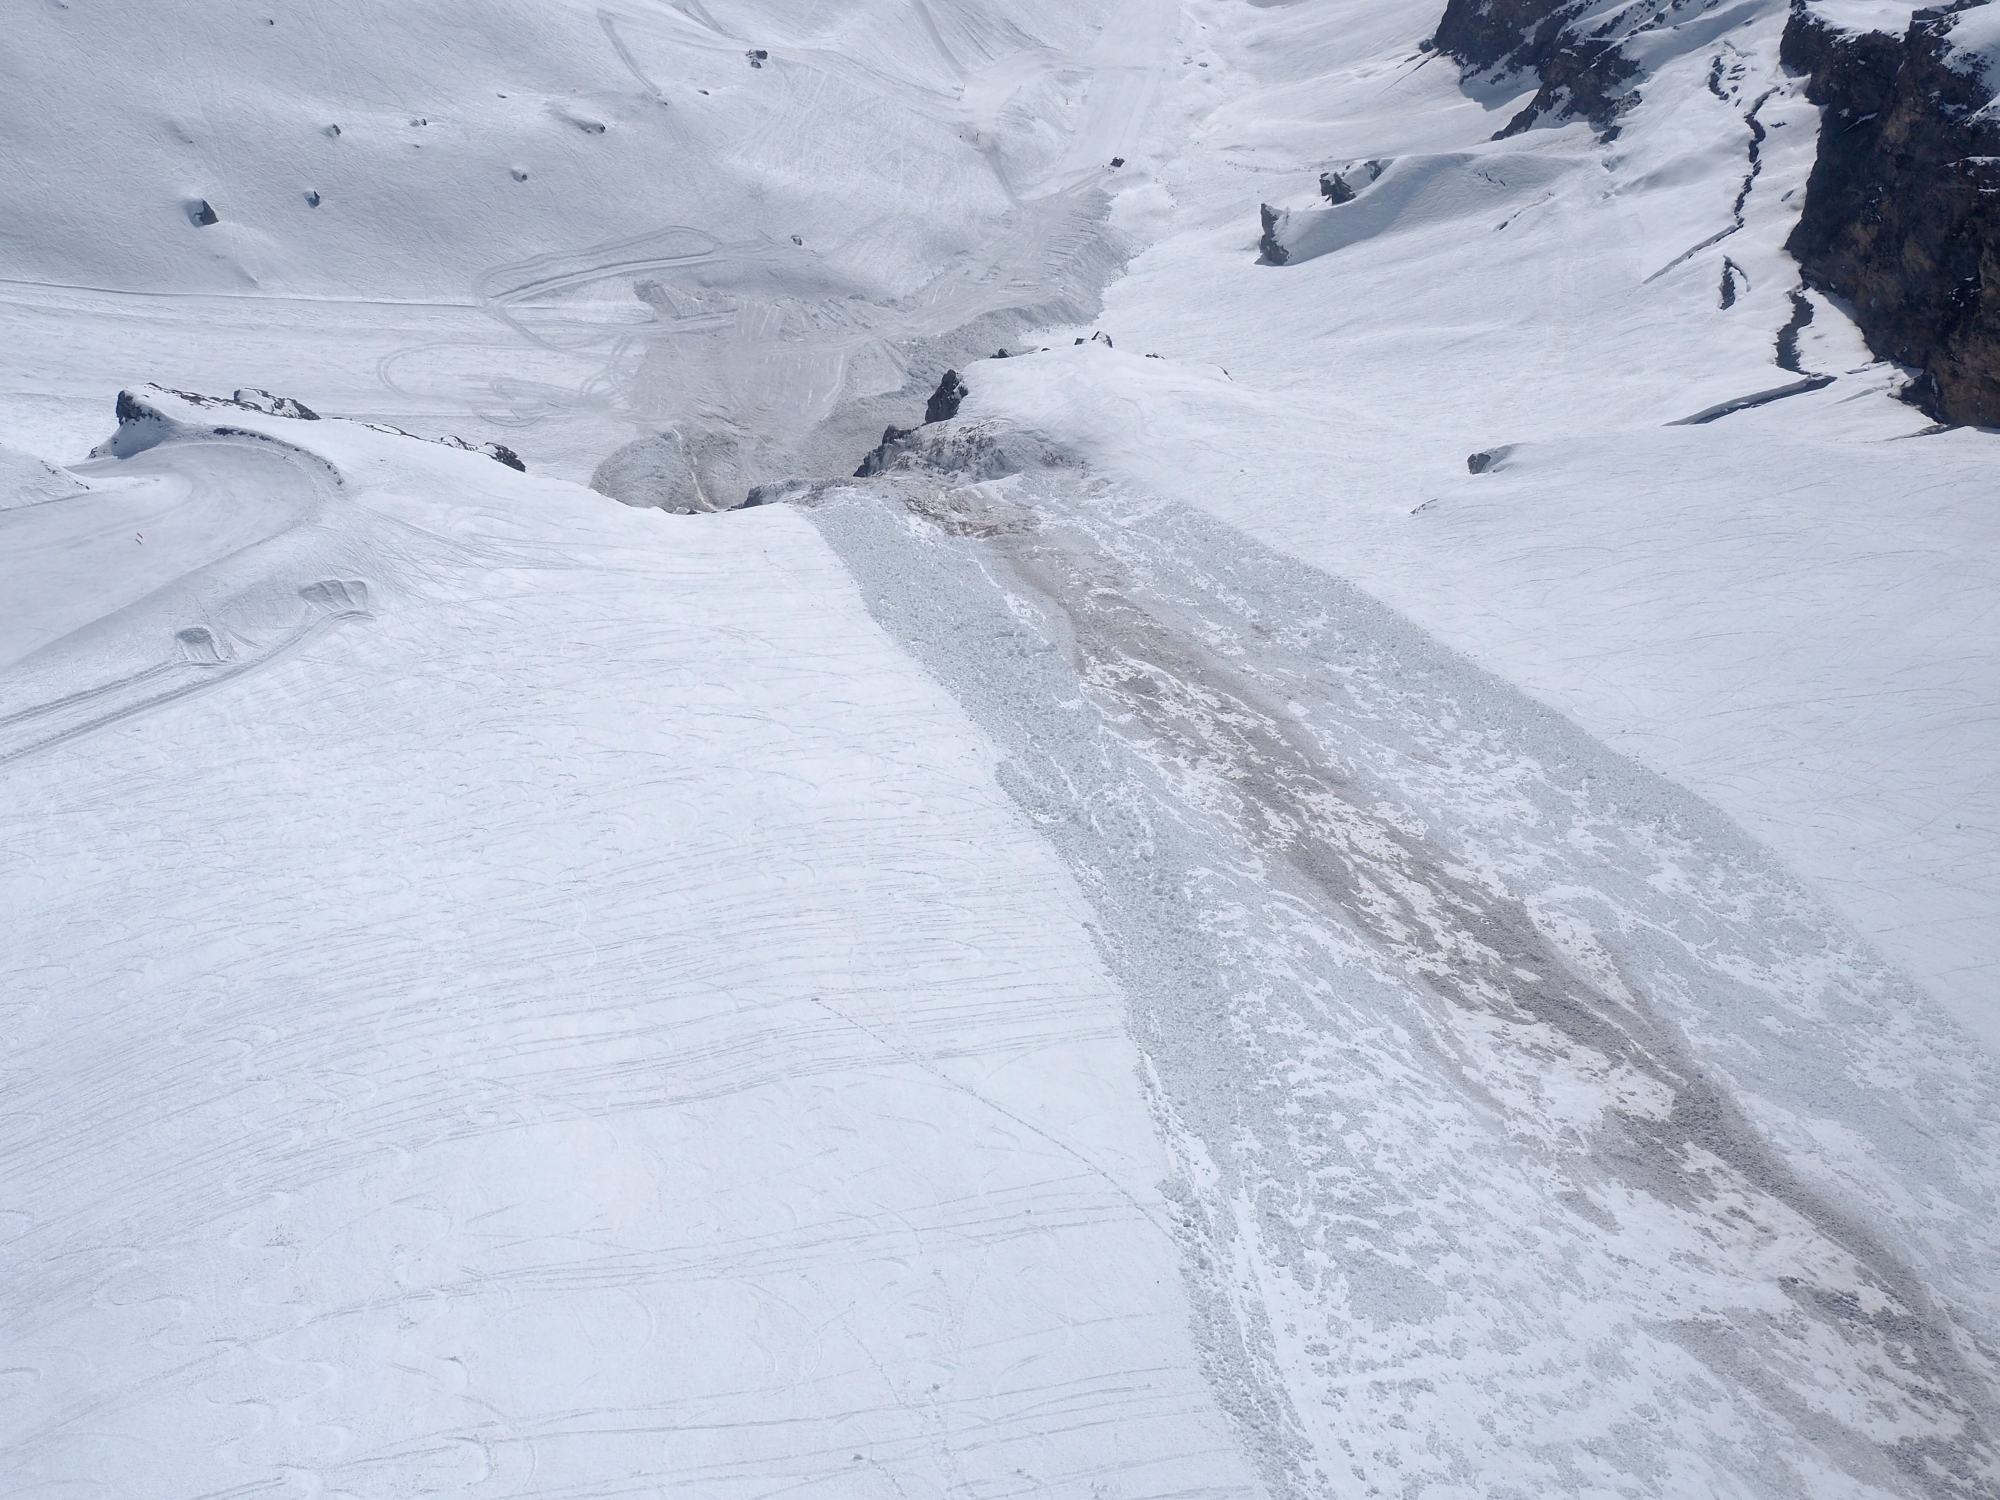 HANDOUT - A general view of the avalanche site in the ski resort of Crans-Montana, Switzerland, Wednesday, February 20, 2019. Several skiers were swept away by an avalanche yesterday that occurred on the ski slope ''Kandahar'' in Crans-Montana. A ski patroller has died from injuries. (Kantonspolizei Wallis) *** NO SALES, DARF NUR MIT VOLLSTAENDIGER QUELLENANGABE VERWENDET WERDEN *** SWITZERLAND AVALANCHE CRANS-MONTANA